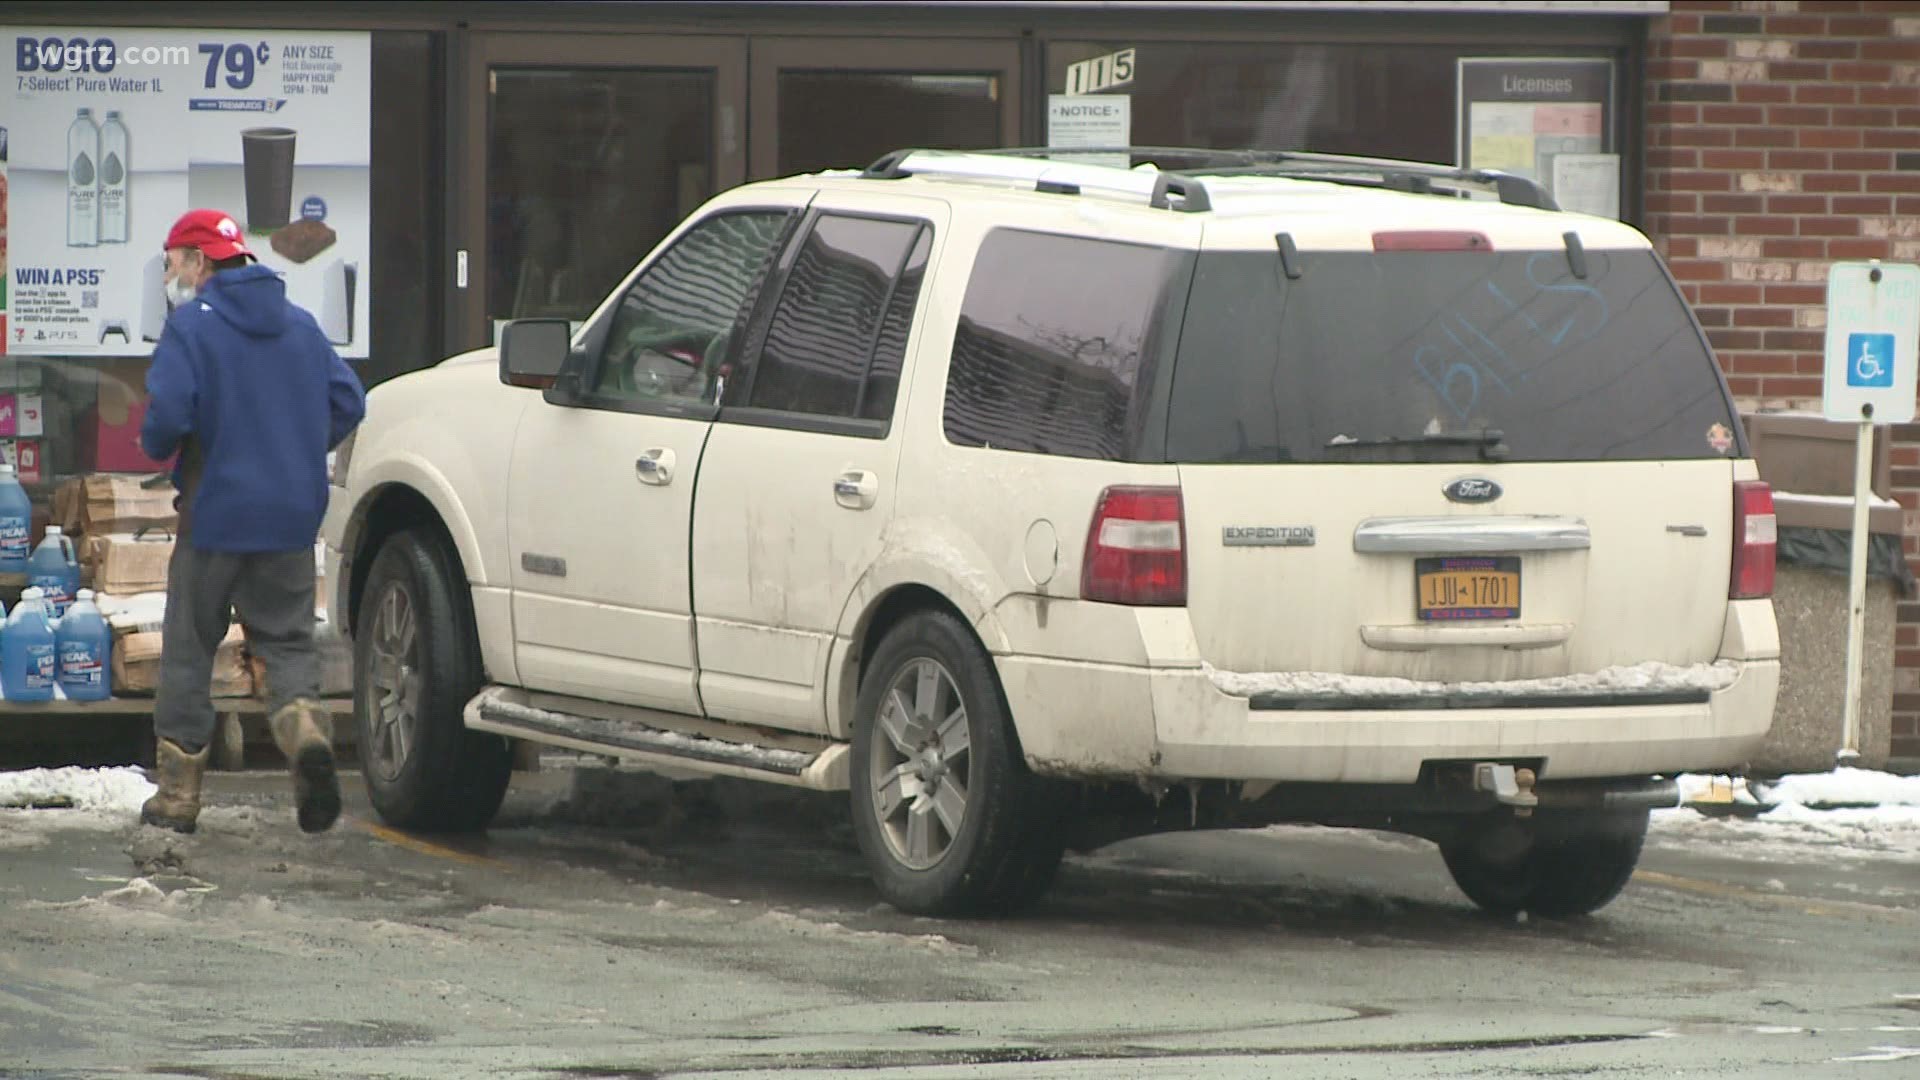 Seven cars on Tuesday were stolen in WNY as they were "warming up" with owners not present.